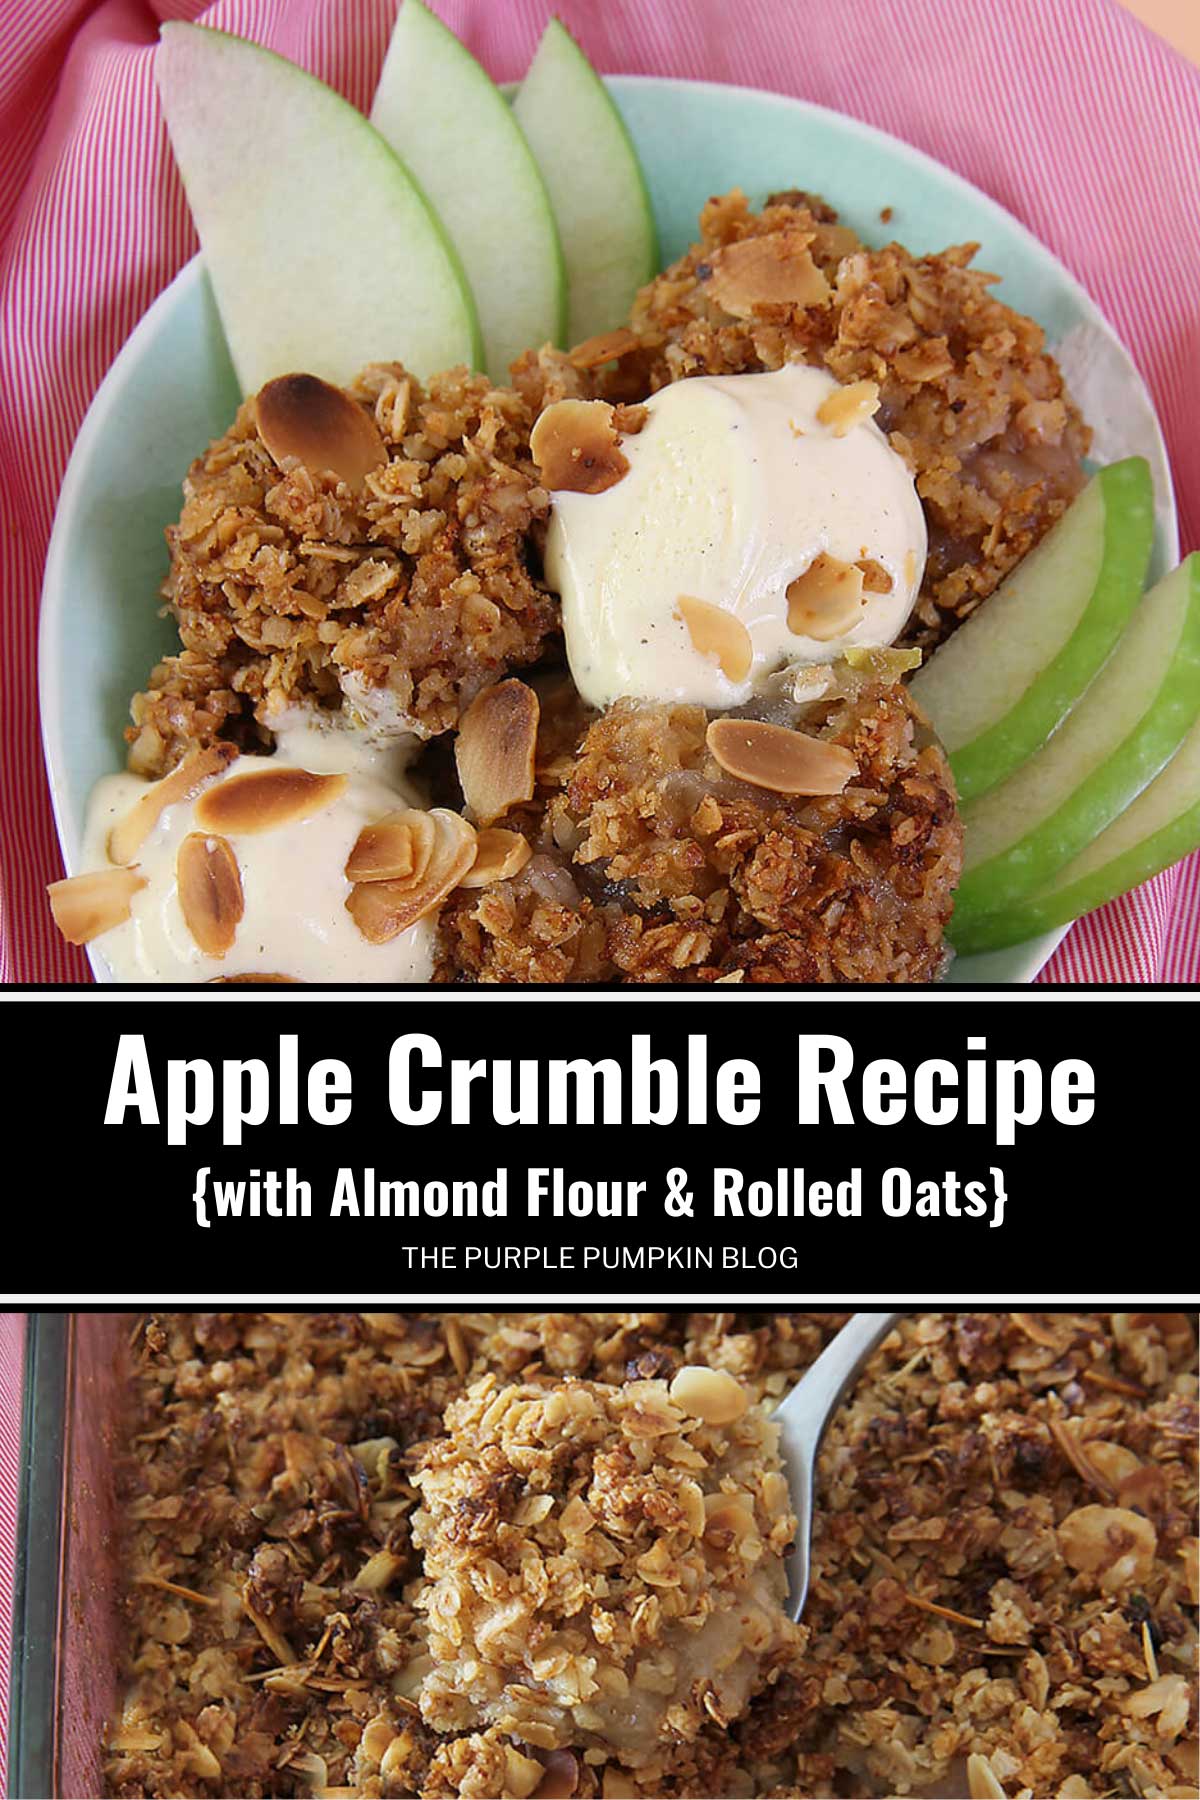 Apple-Crumble-Recipe-with-Almond-Flour-and-Rolled-Oats